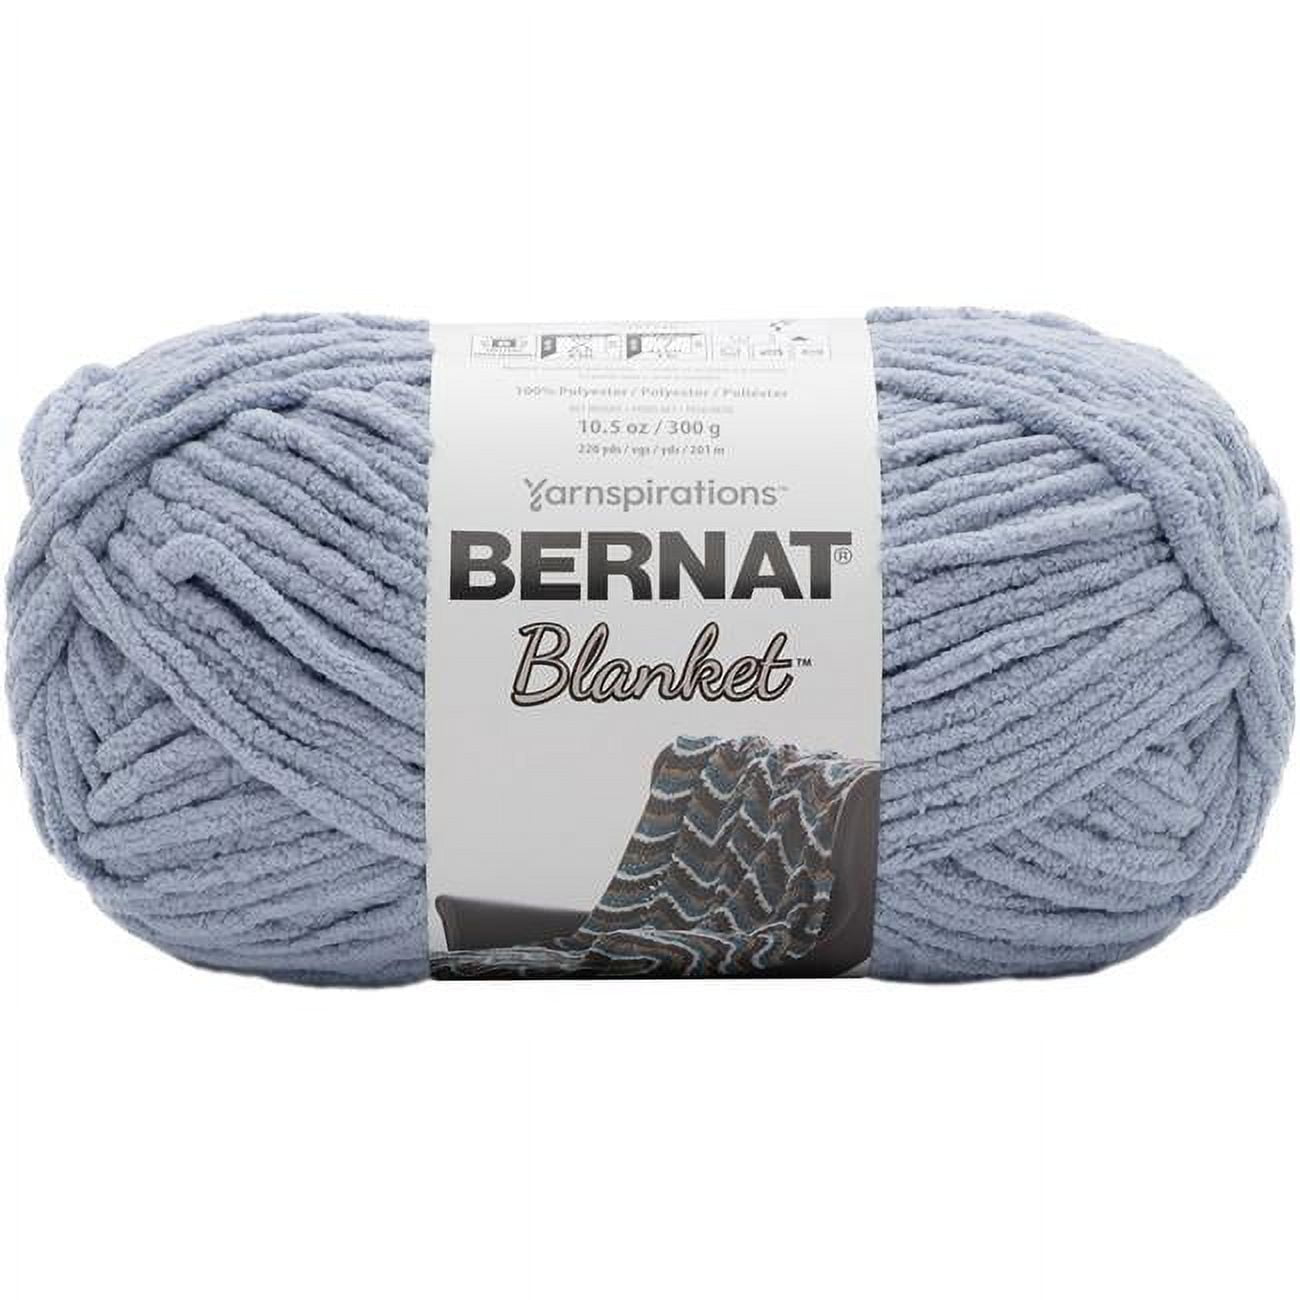 Roughly how many skeins of Bernat Blanket Extra yarn would you recommend to  hand knit somewhere between a twin or queen size blanket? : r/askcrochet